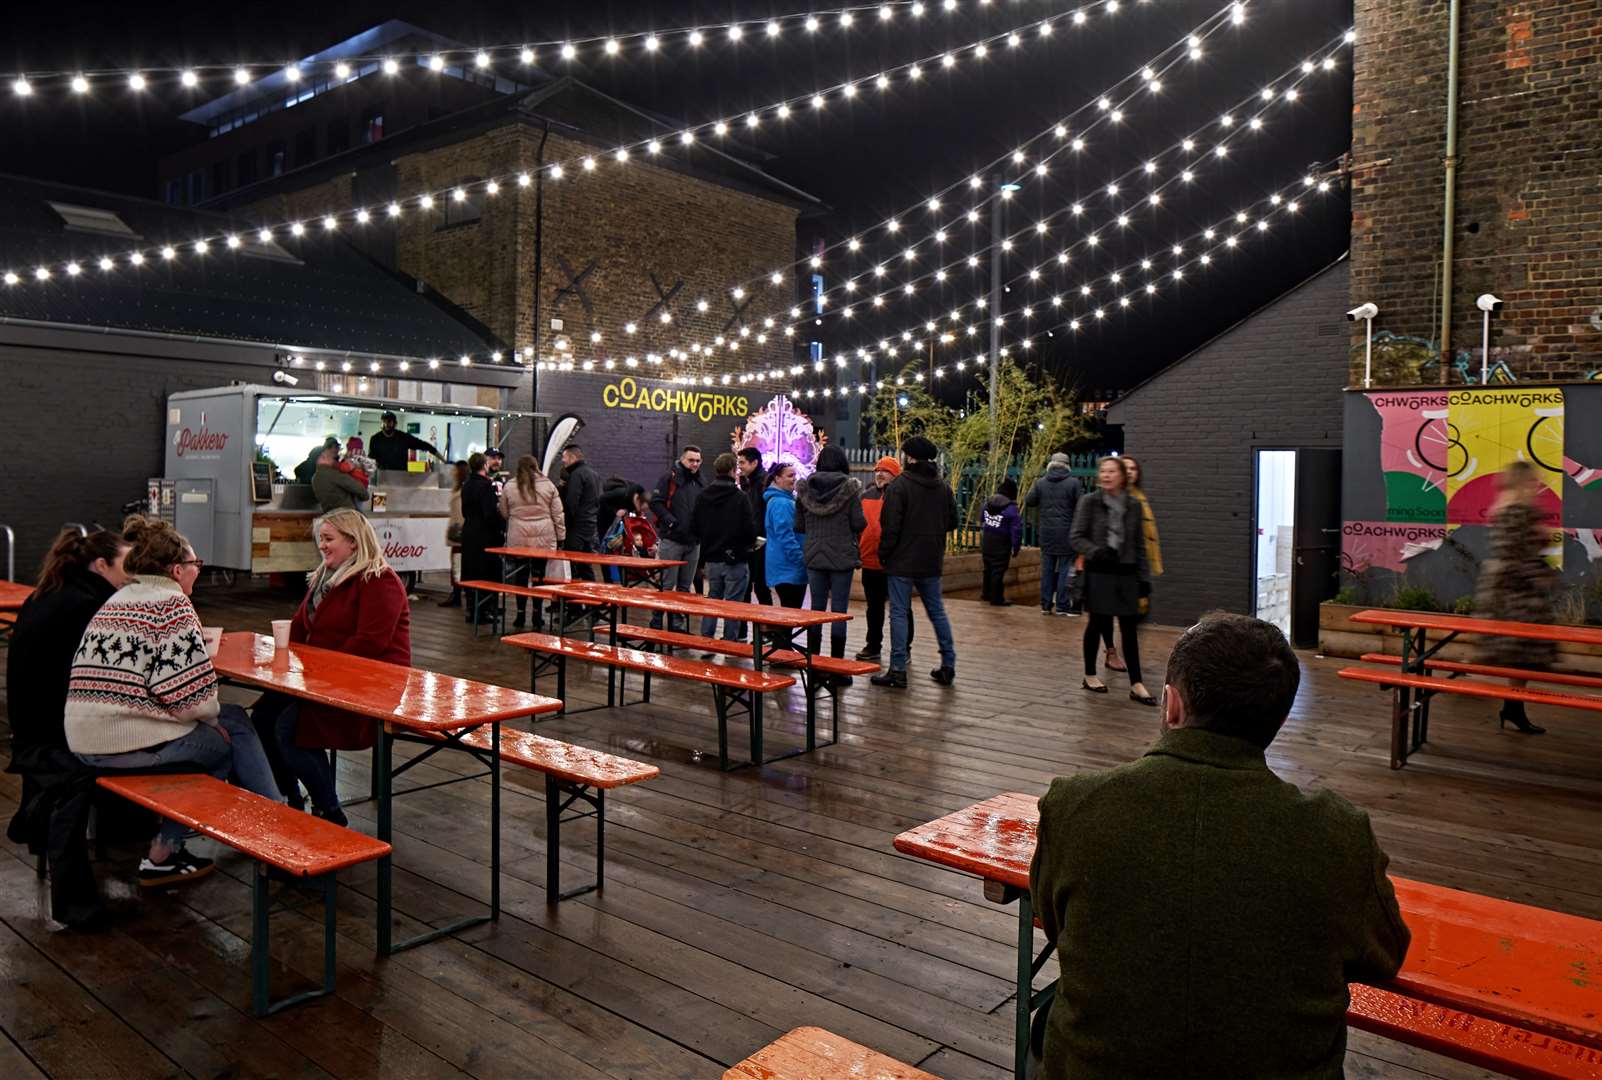 The Coachworks site now boasts a vast array of indoor and outdoor eating options and often held craft exhibitions and concerts before the lockdown